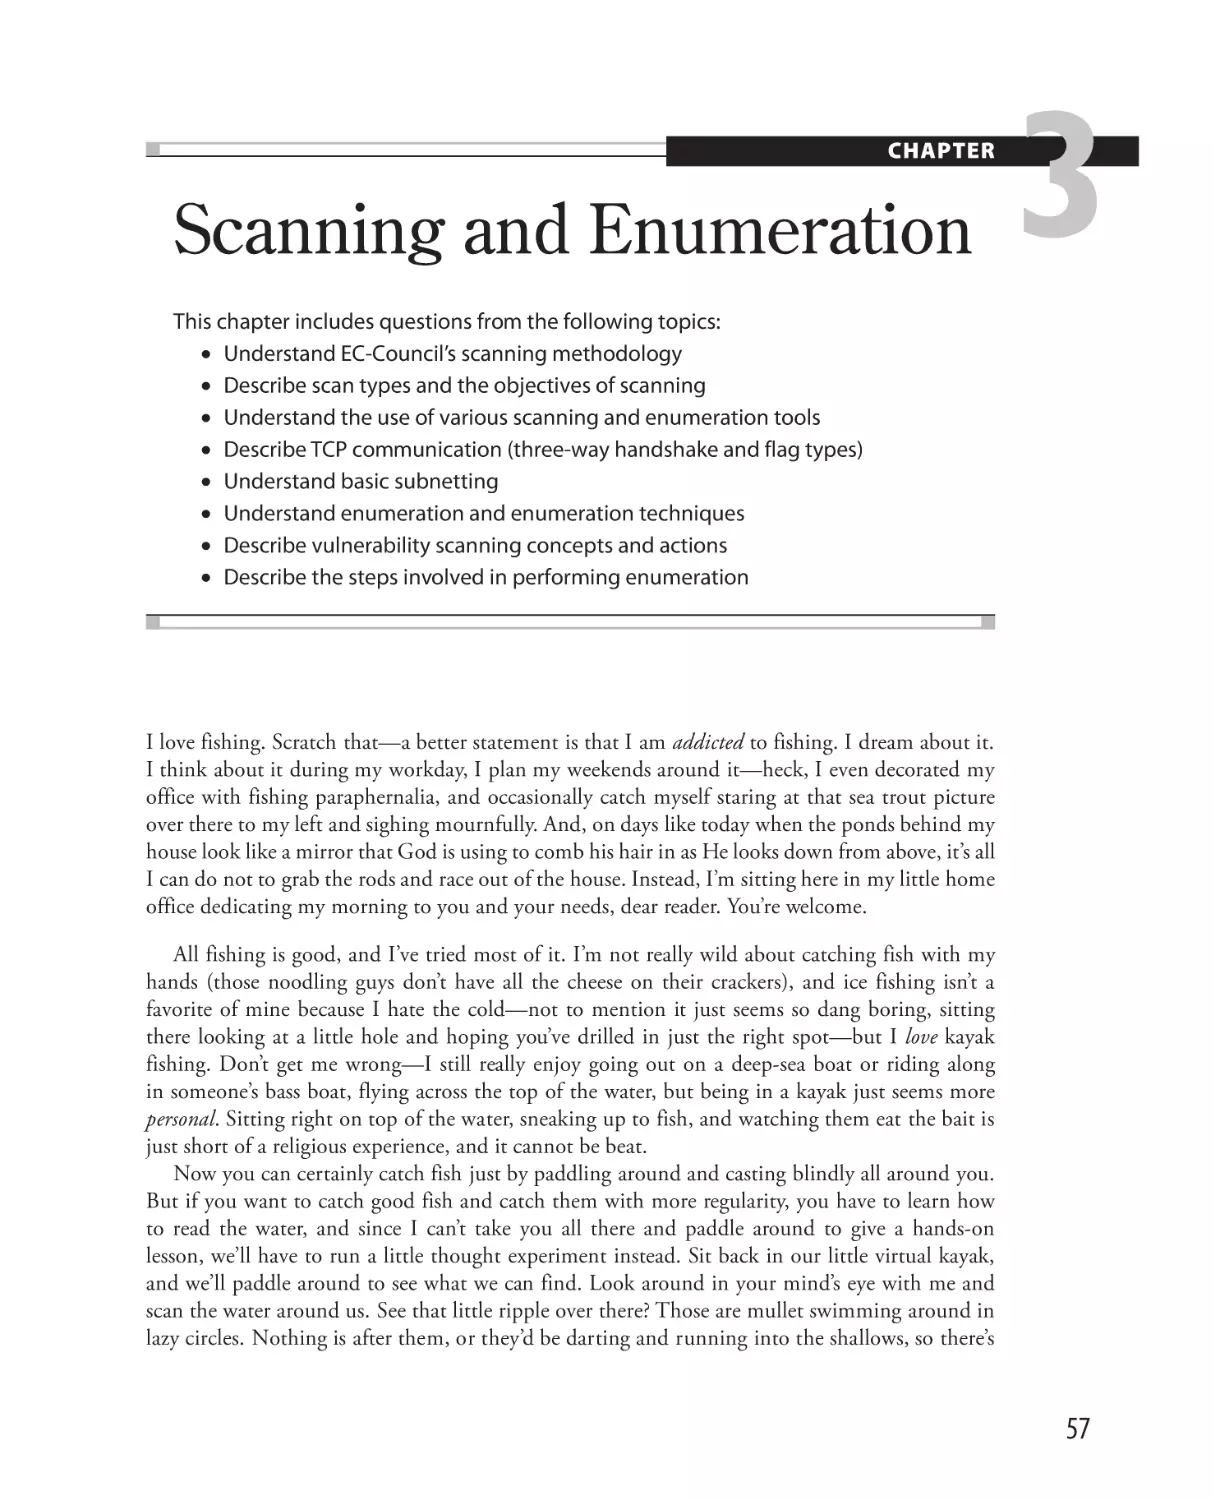 Scanning and Enumeration